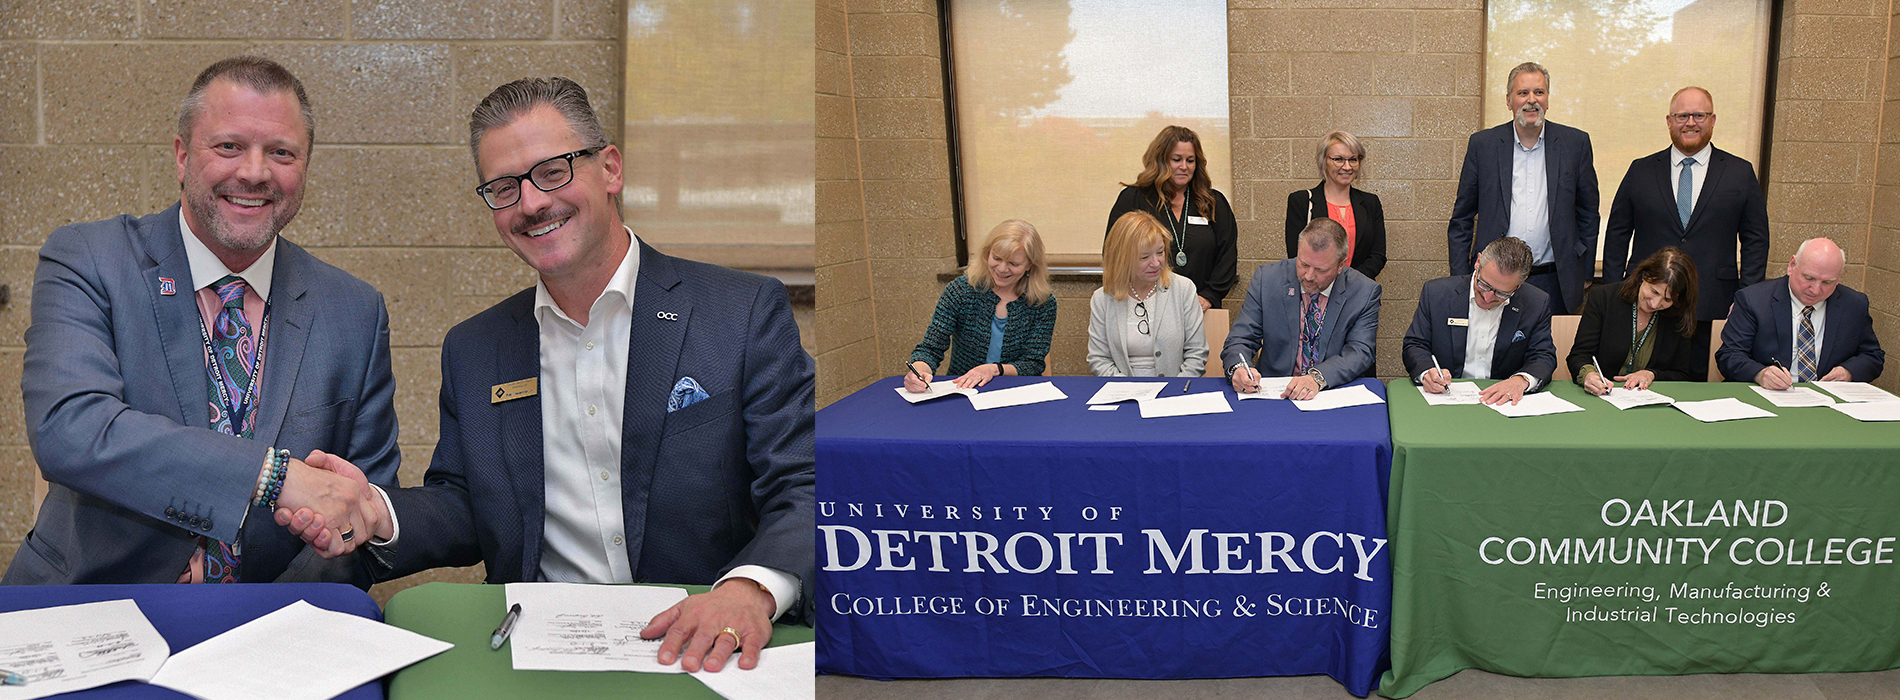 At left, two people sitting at a table shake hands and smile for a photo indoors. At right, six people sit at a table and sign papers, with four more standing behind them indoors. Banners in front of them read University of ɫۺϾþ Mercy College of Engineering & Science and Oakland Community College, Engineering, Manufacturing & Industrial Technologies.